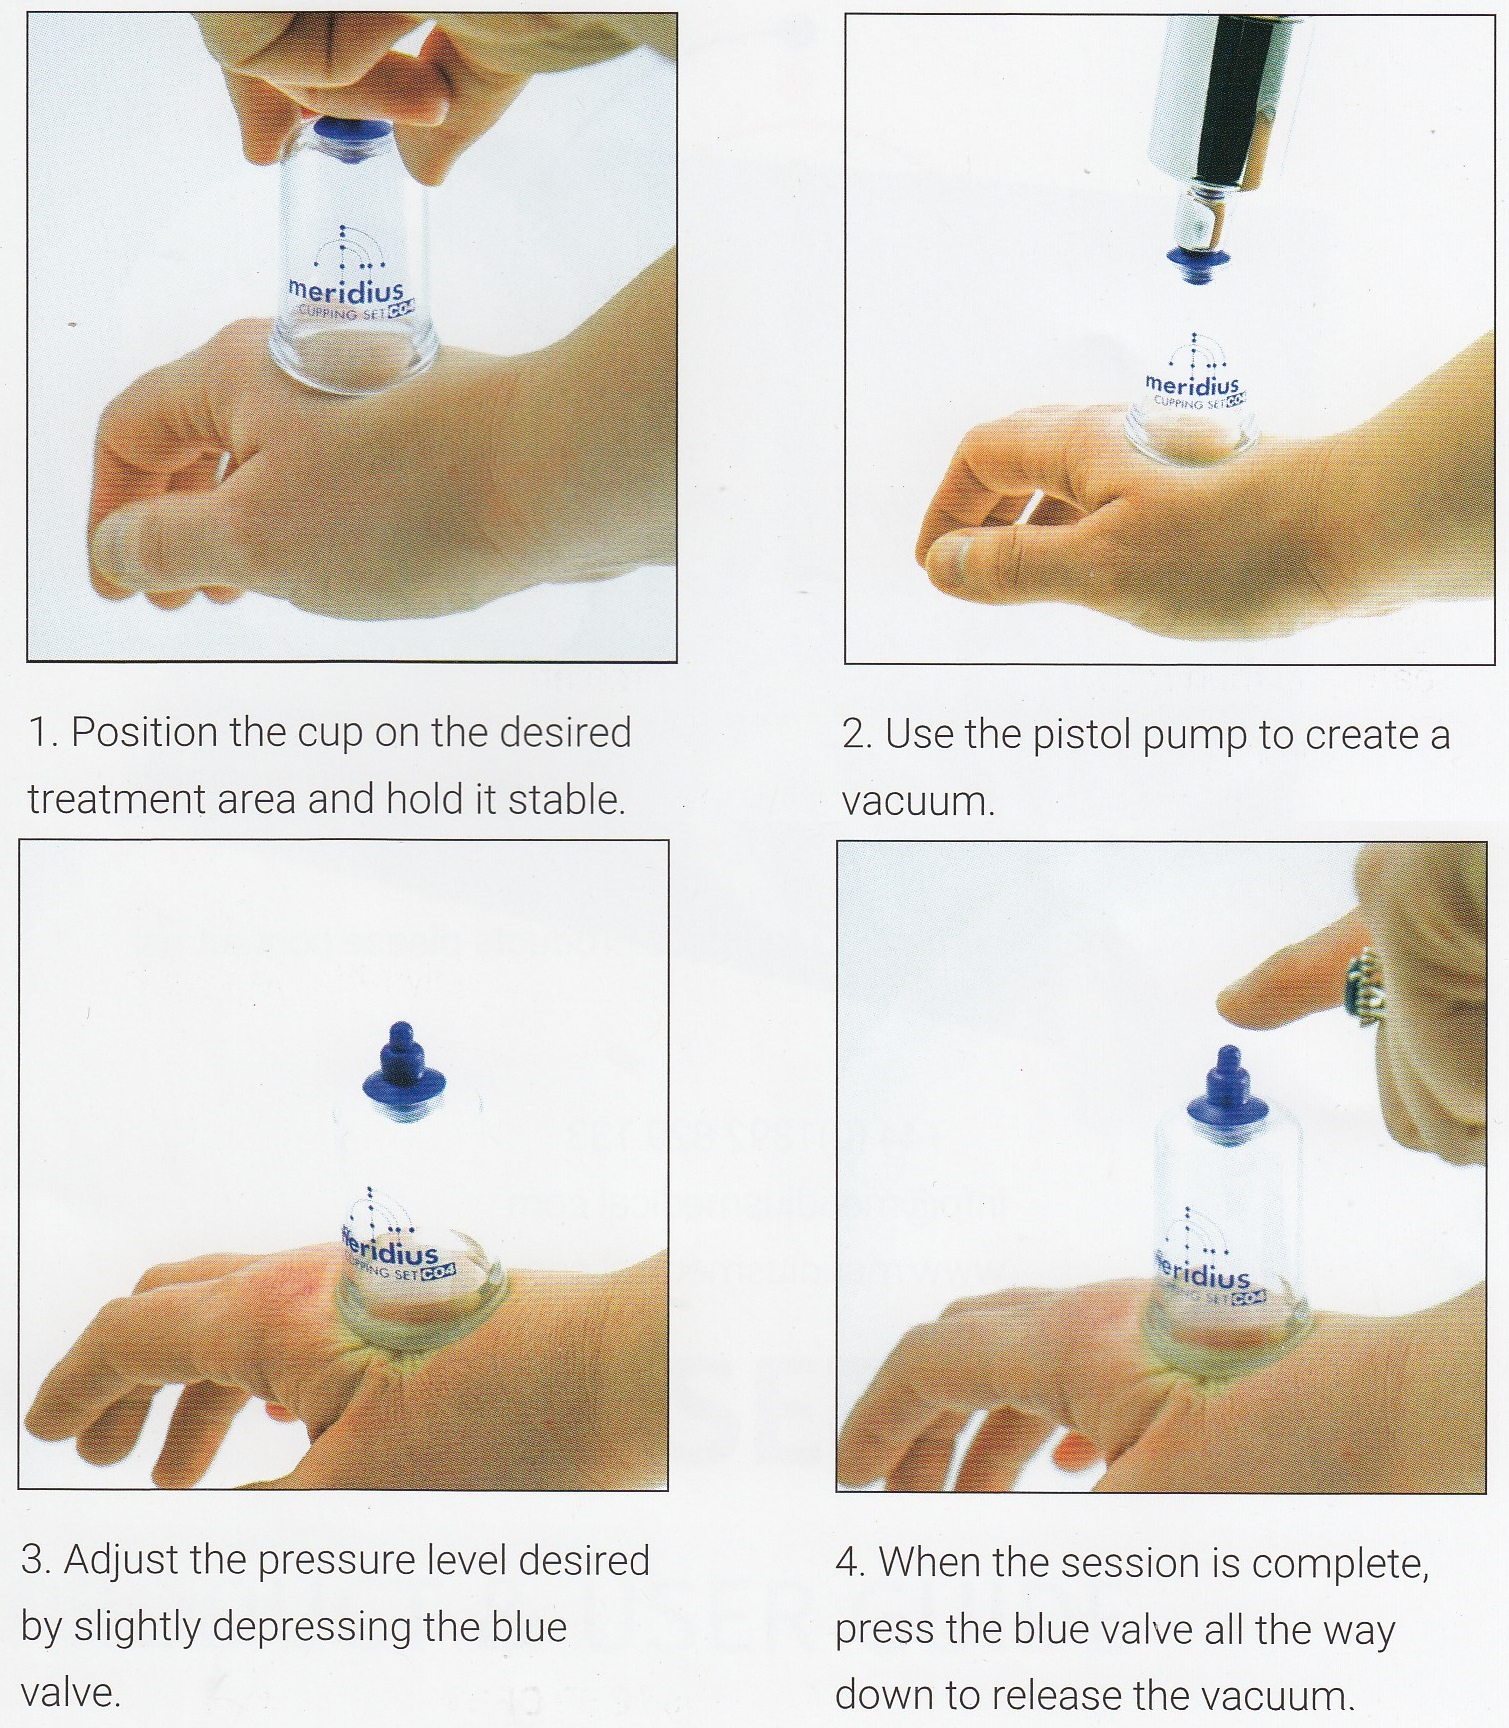 How To Perform Cupping Therapy With The Meridius Cupping Set